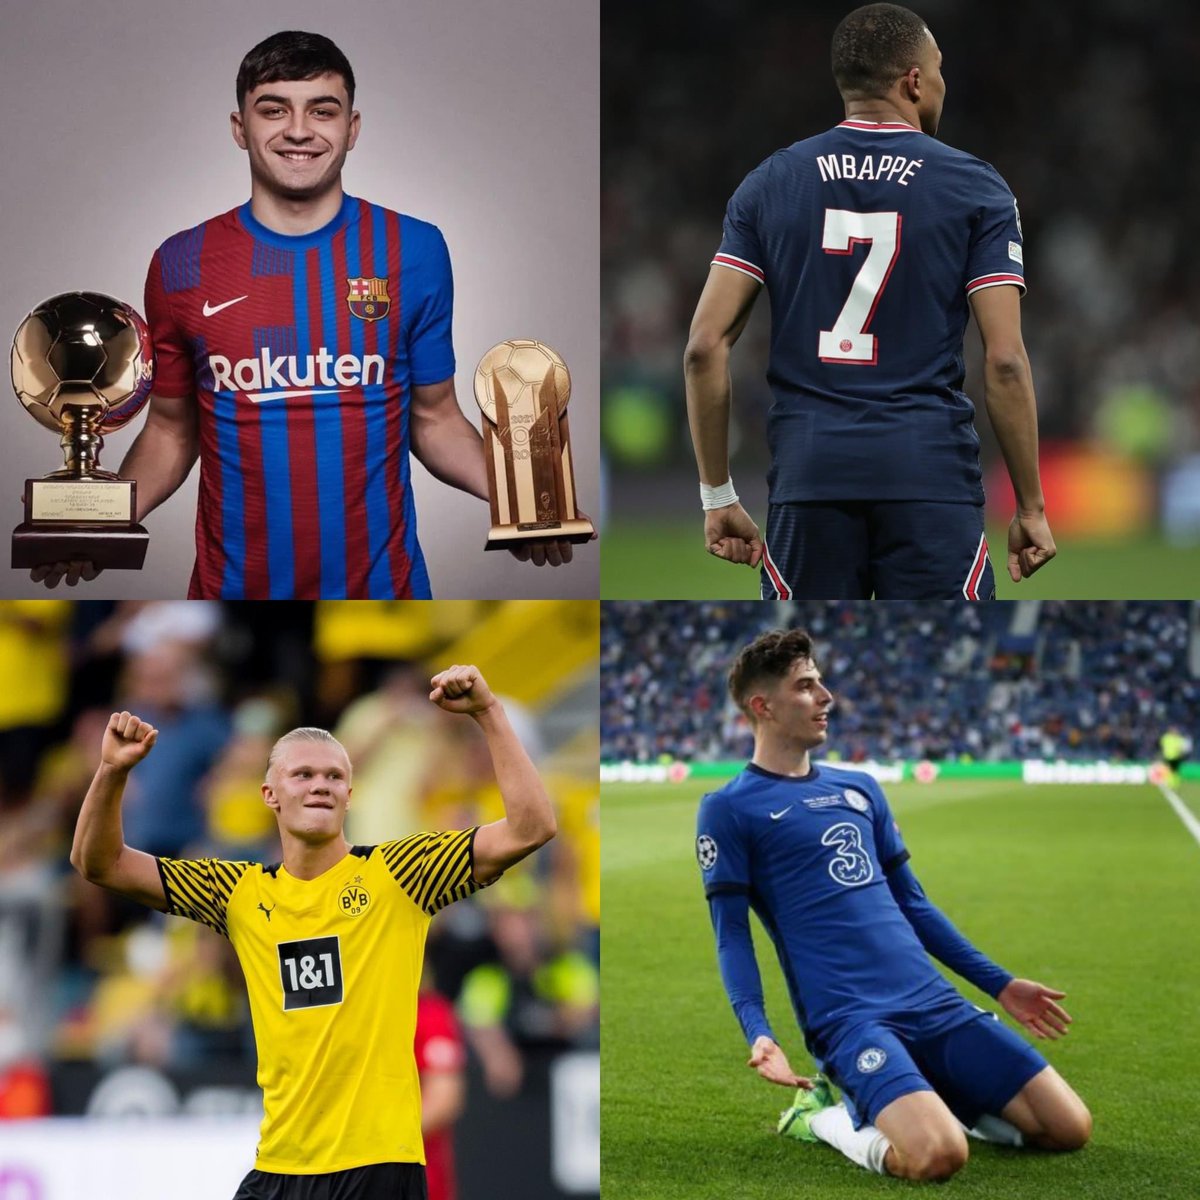 For me the best 4 youngsters in world at this moment. Do you guys agree?